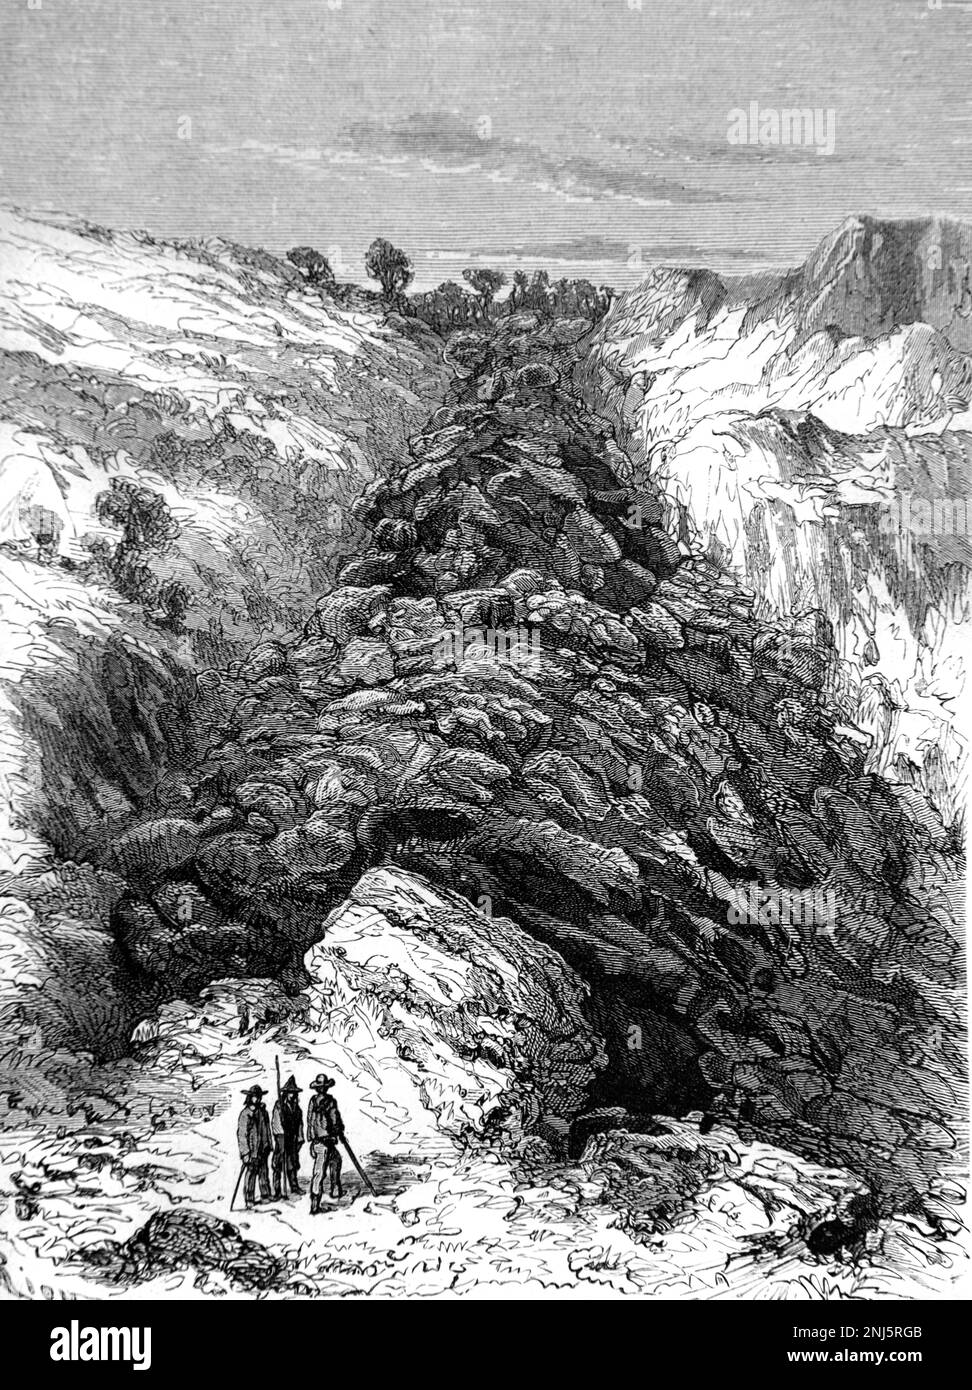 Lava Flows in Pharaoh's Pit or Channel, aka Fosse Pharaon, Following Eruption of Mount Vesuvius Volcano in 1858 Naples Italy. Vintage Engraving or Illustration 1862 Stock Photo